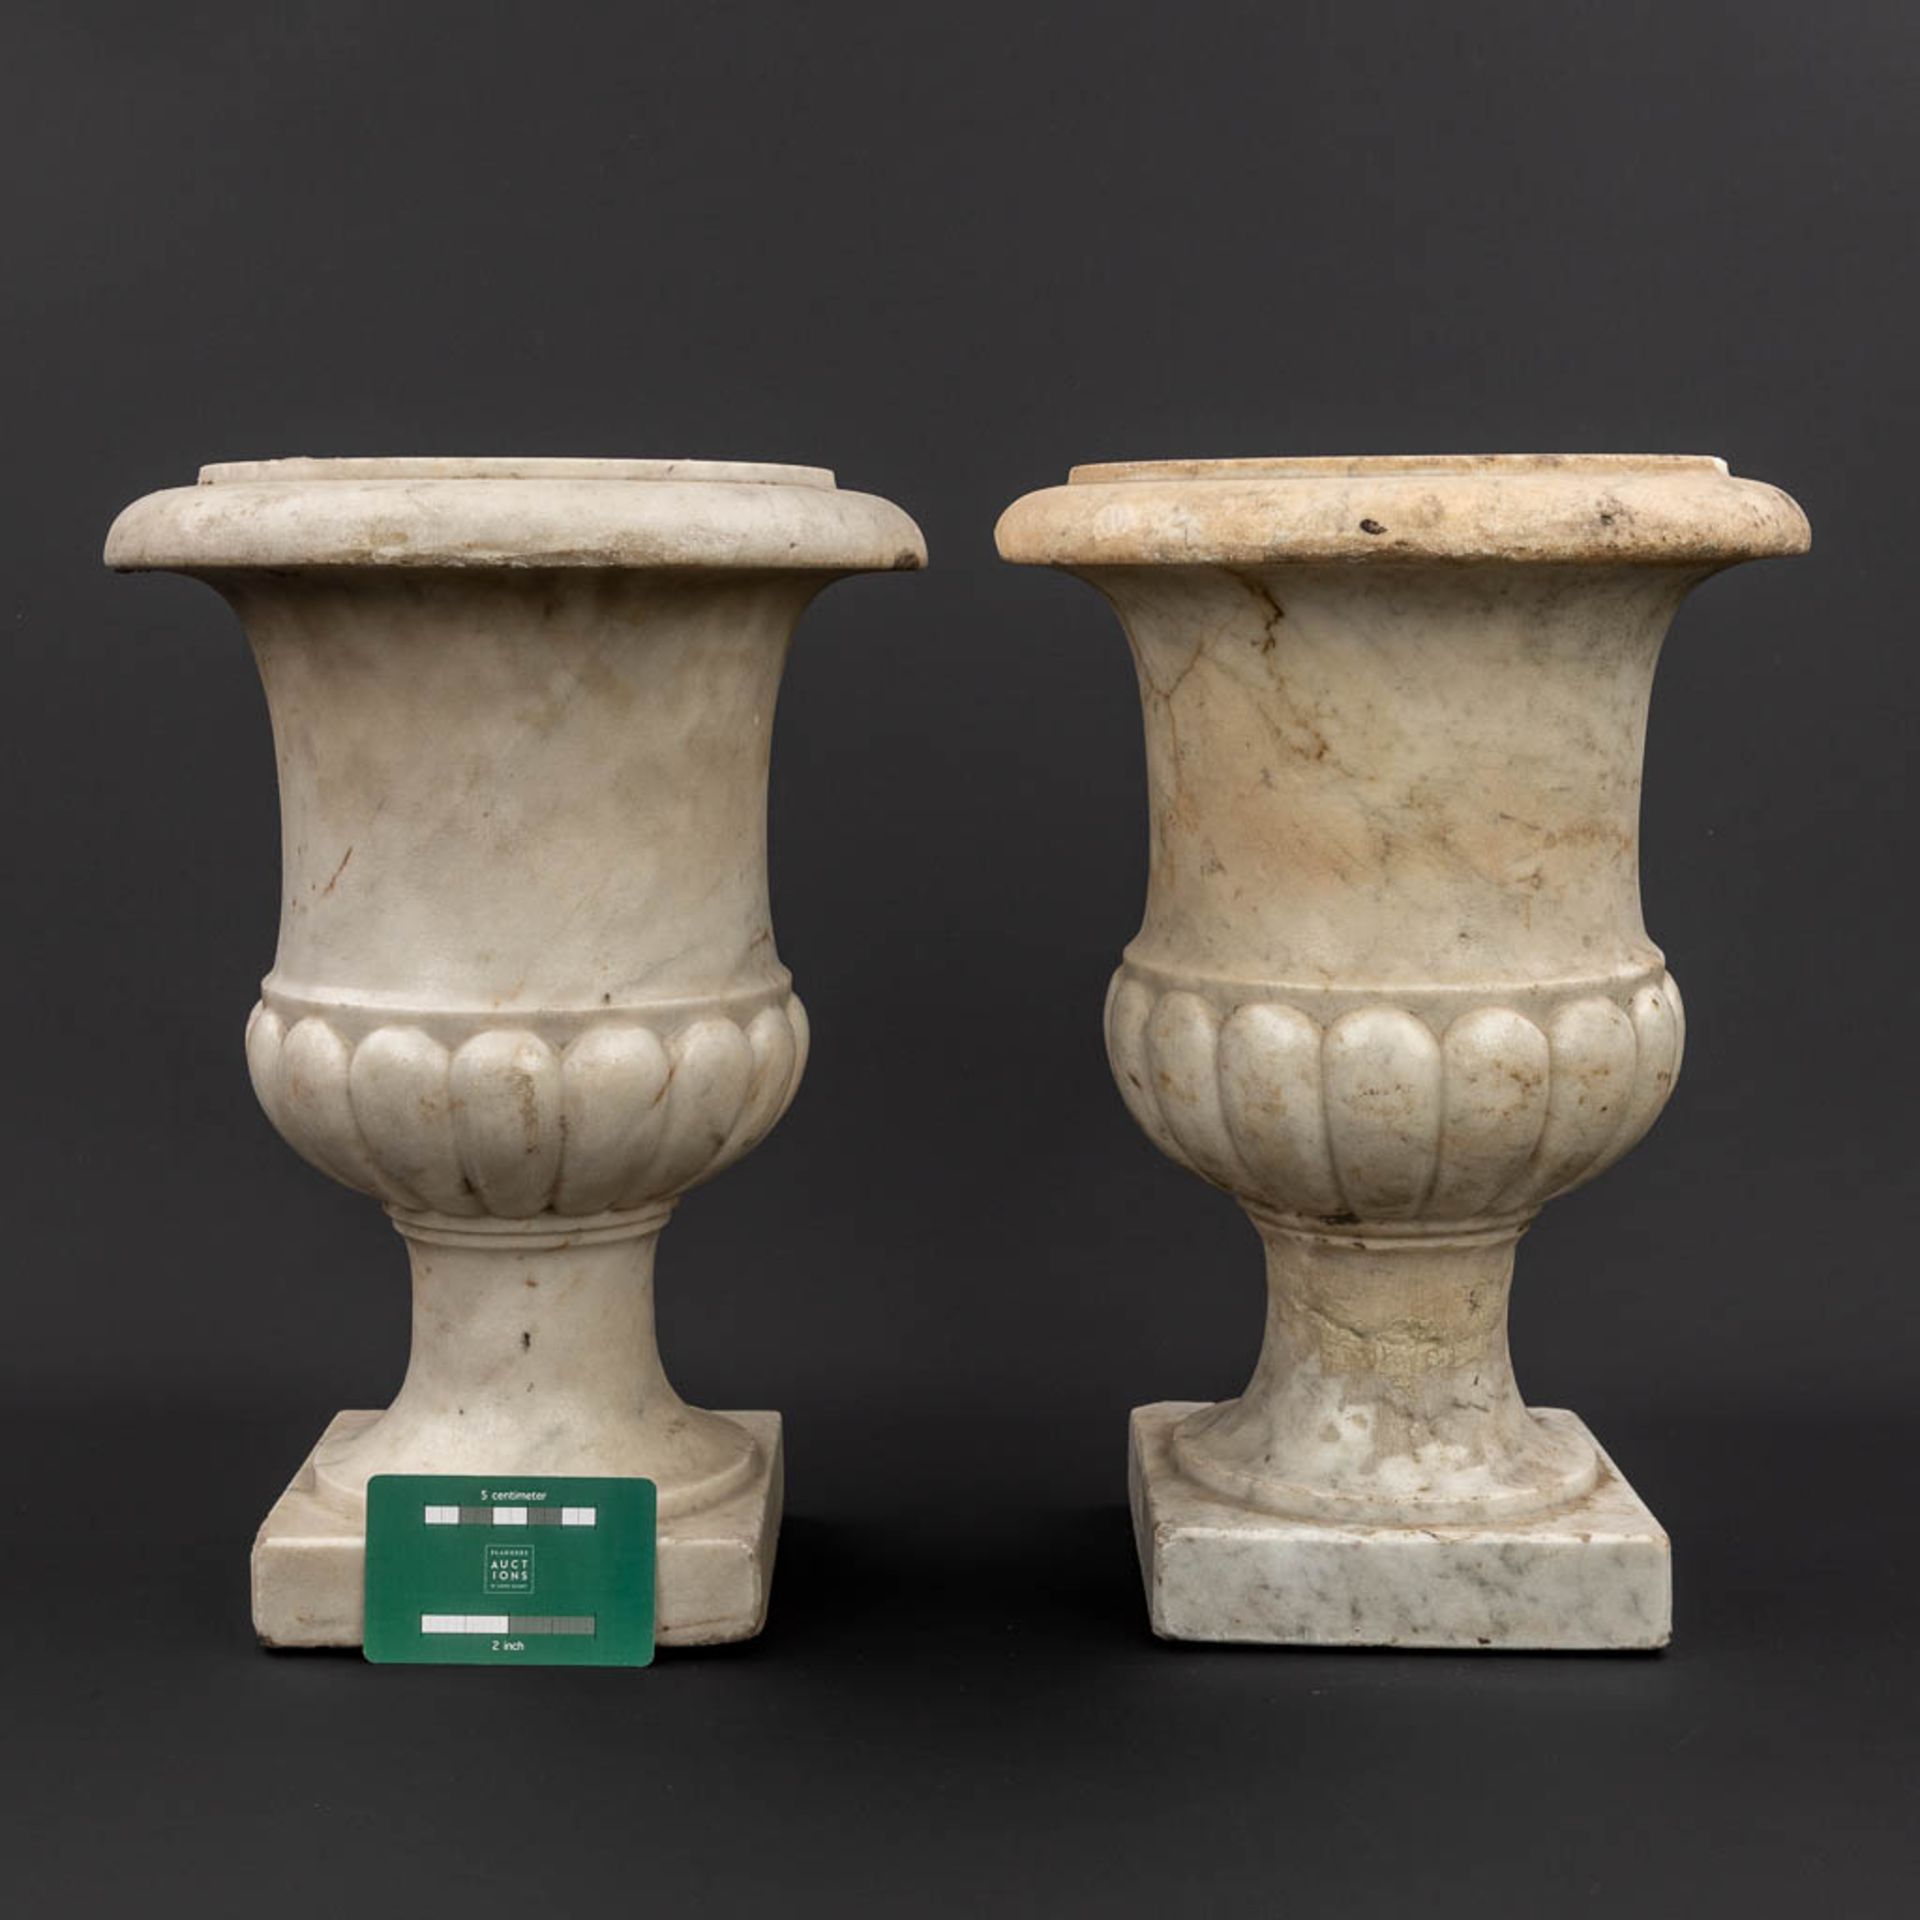 A pair of marble urns 'Medici Vases' made of sculptured marble, 18th C. (H:36 x D:26 cm) - Image 9 of 11